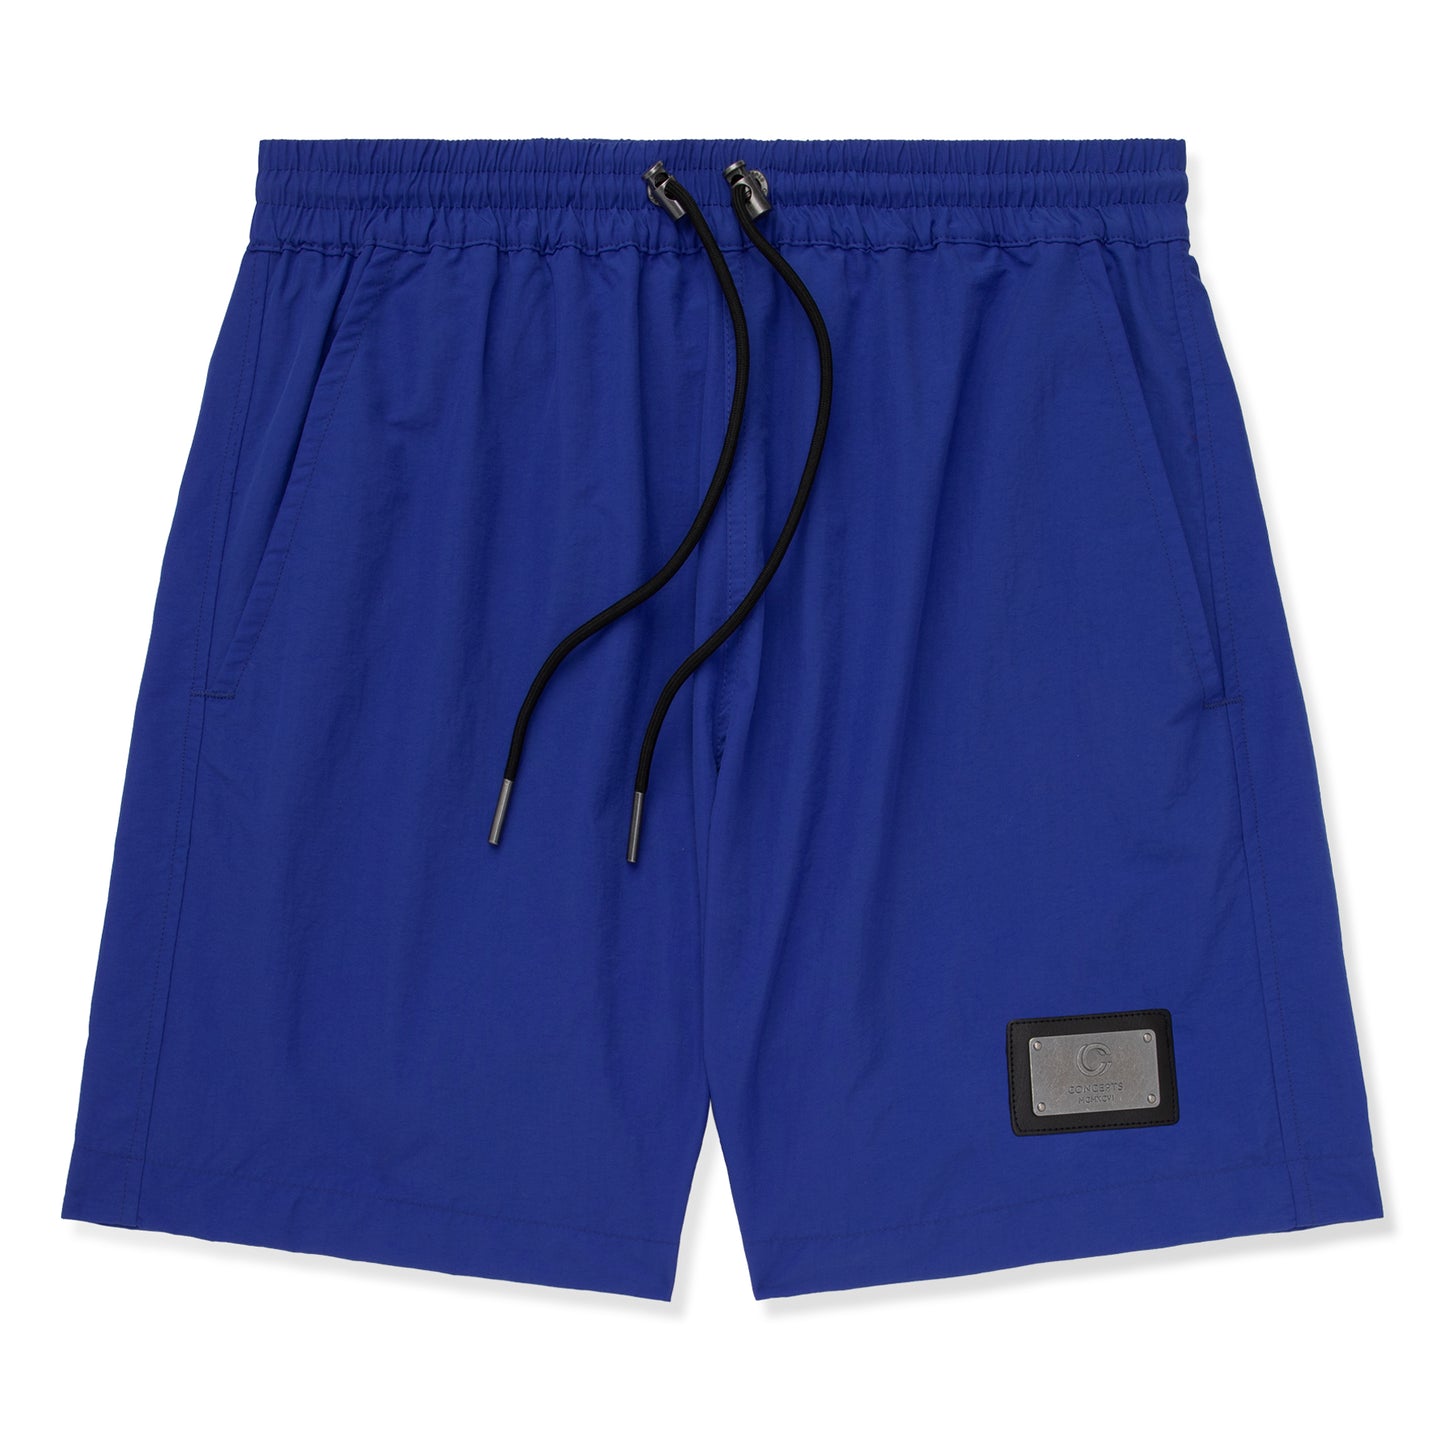 Concepts Home Plate Shorts (Royal Blue)